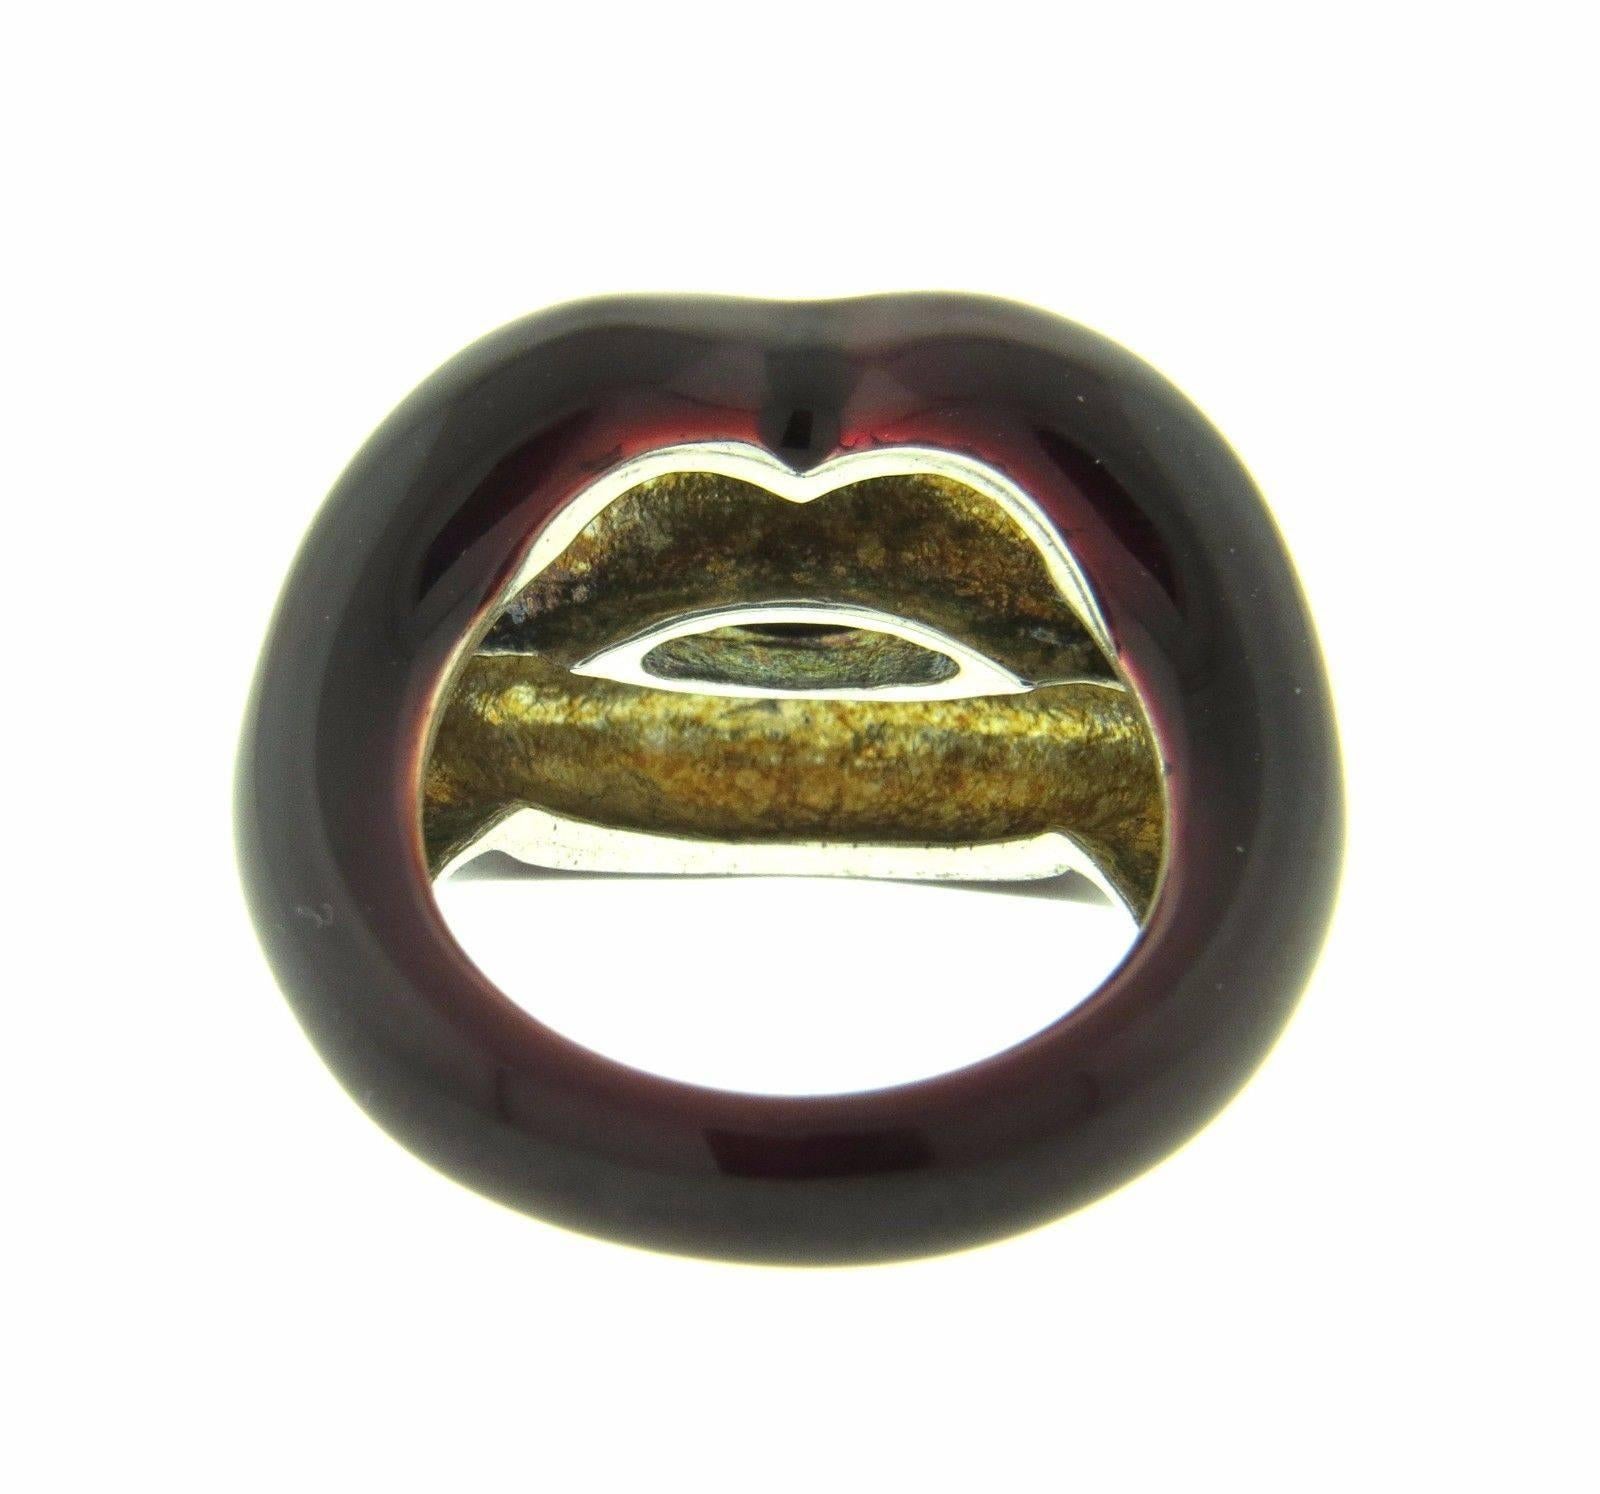 A sterling silver ring adorned with burgundy enamel.  The ring is a size 6.5, top measures 16mm at widest point.  The weight of the piece is 12.5 grams.  Marked: S-AP 925.